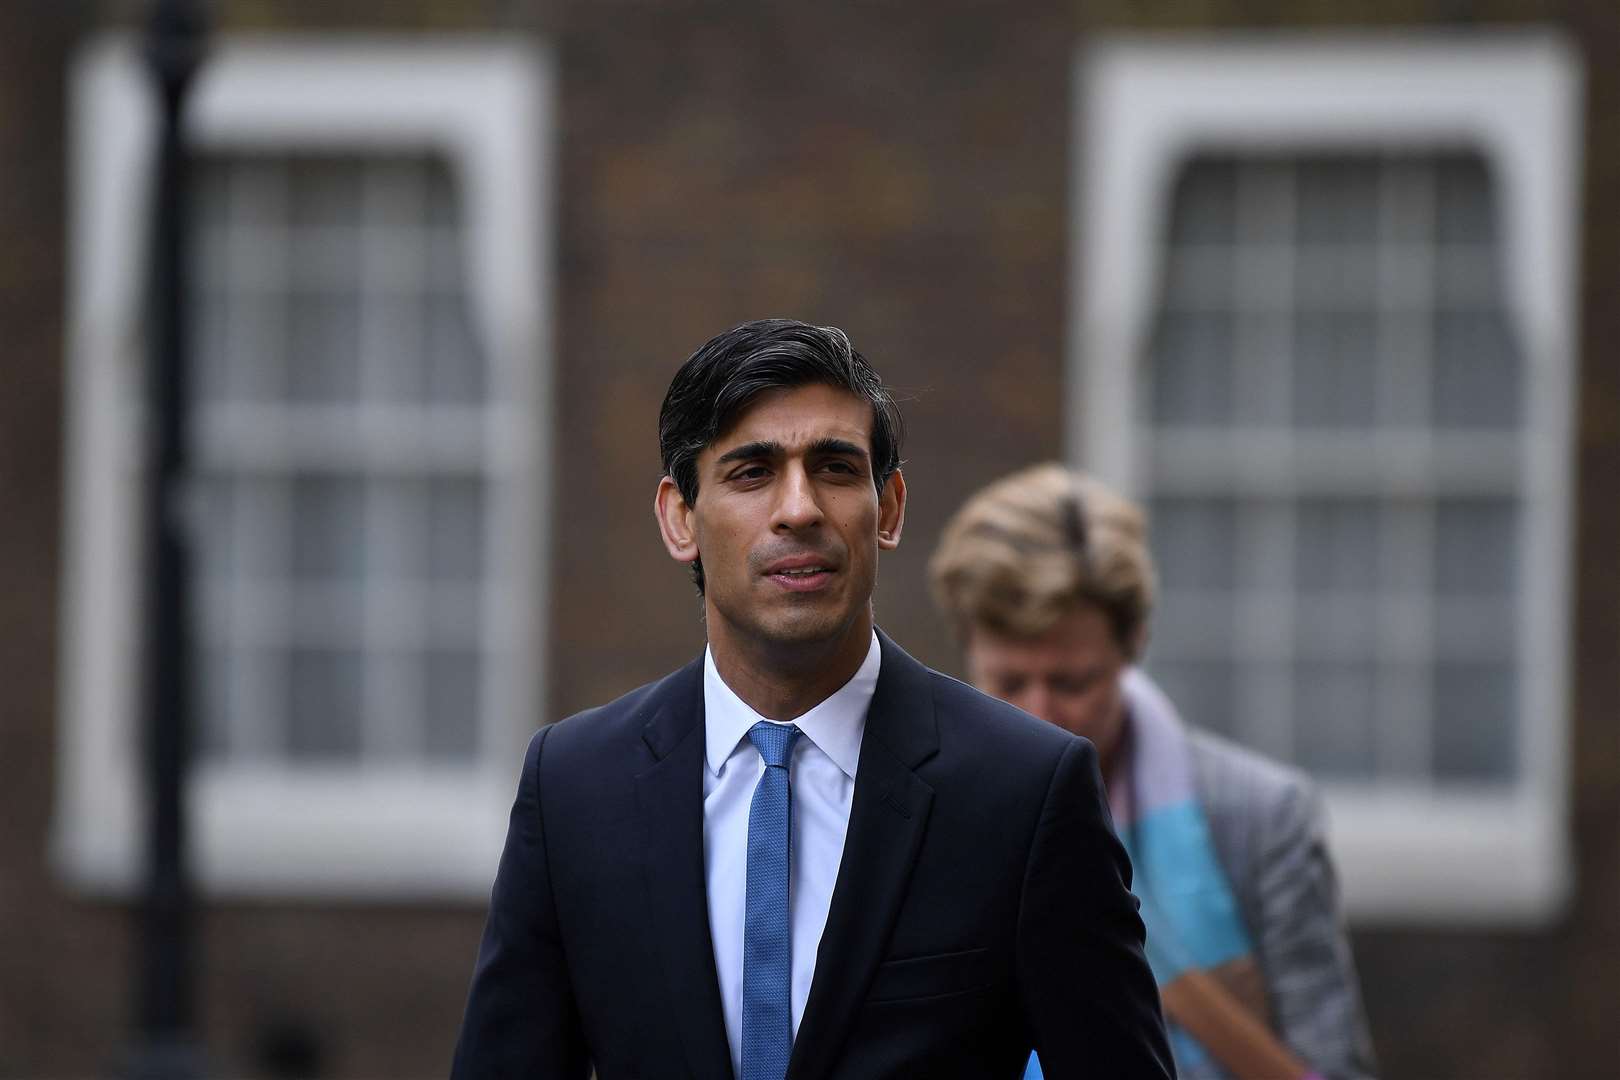 Britain's Chancellor of the Exchequer Rishi Sunak leaves Downing Street in central London on April 6, 2020. - British Prime Minister Boris Johnson spent the night in hospital after being admitted for tests following 10 days of persistent symptoms of coronavirus, but the government insisted today he remained in charge. (Photo by DANIEL LEAL-OLIVAS / AFP) (Photo by DANIEL LEAL-OLIVAS/AFP via Getty Images).